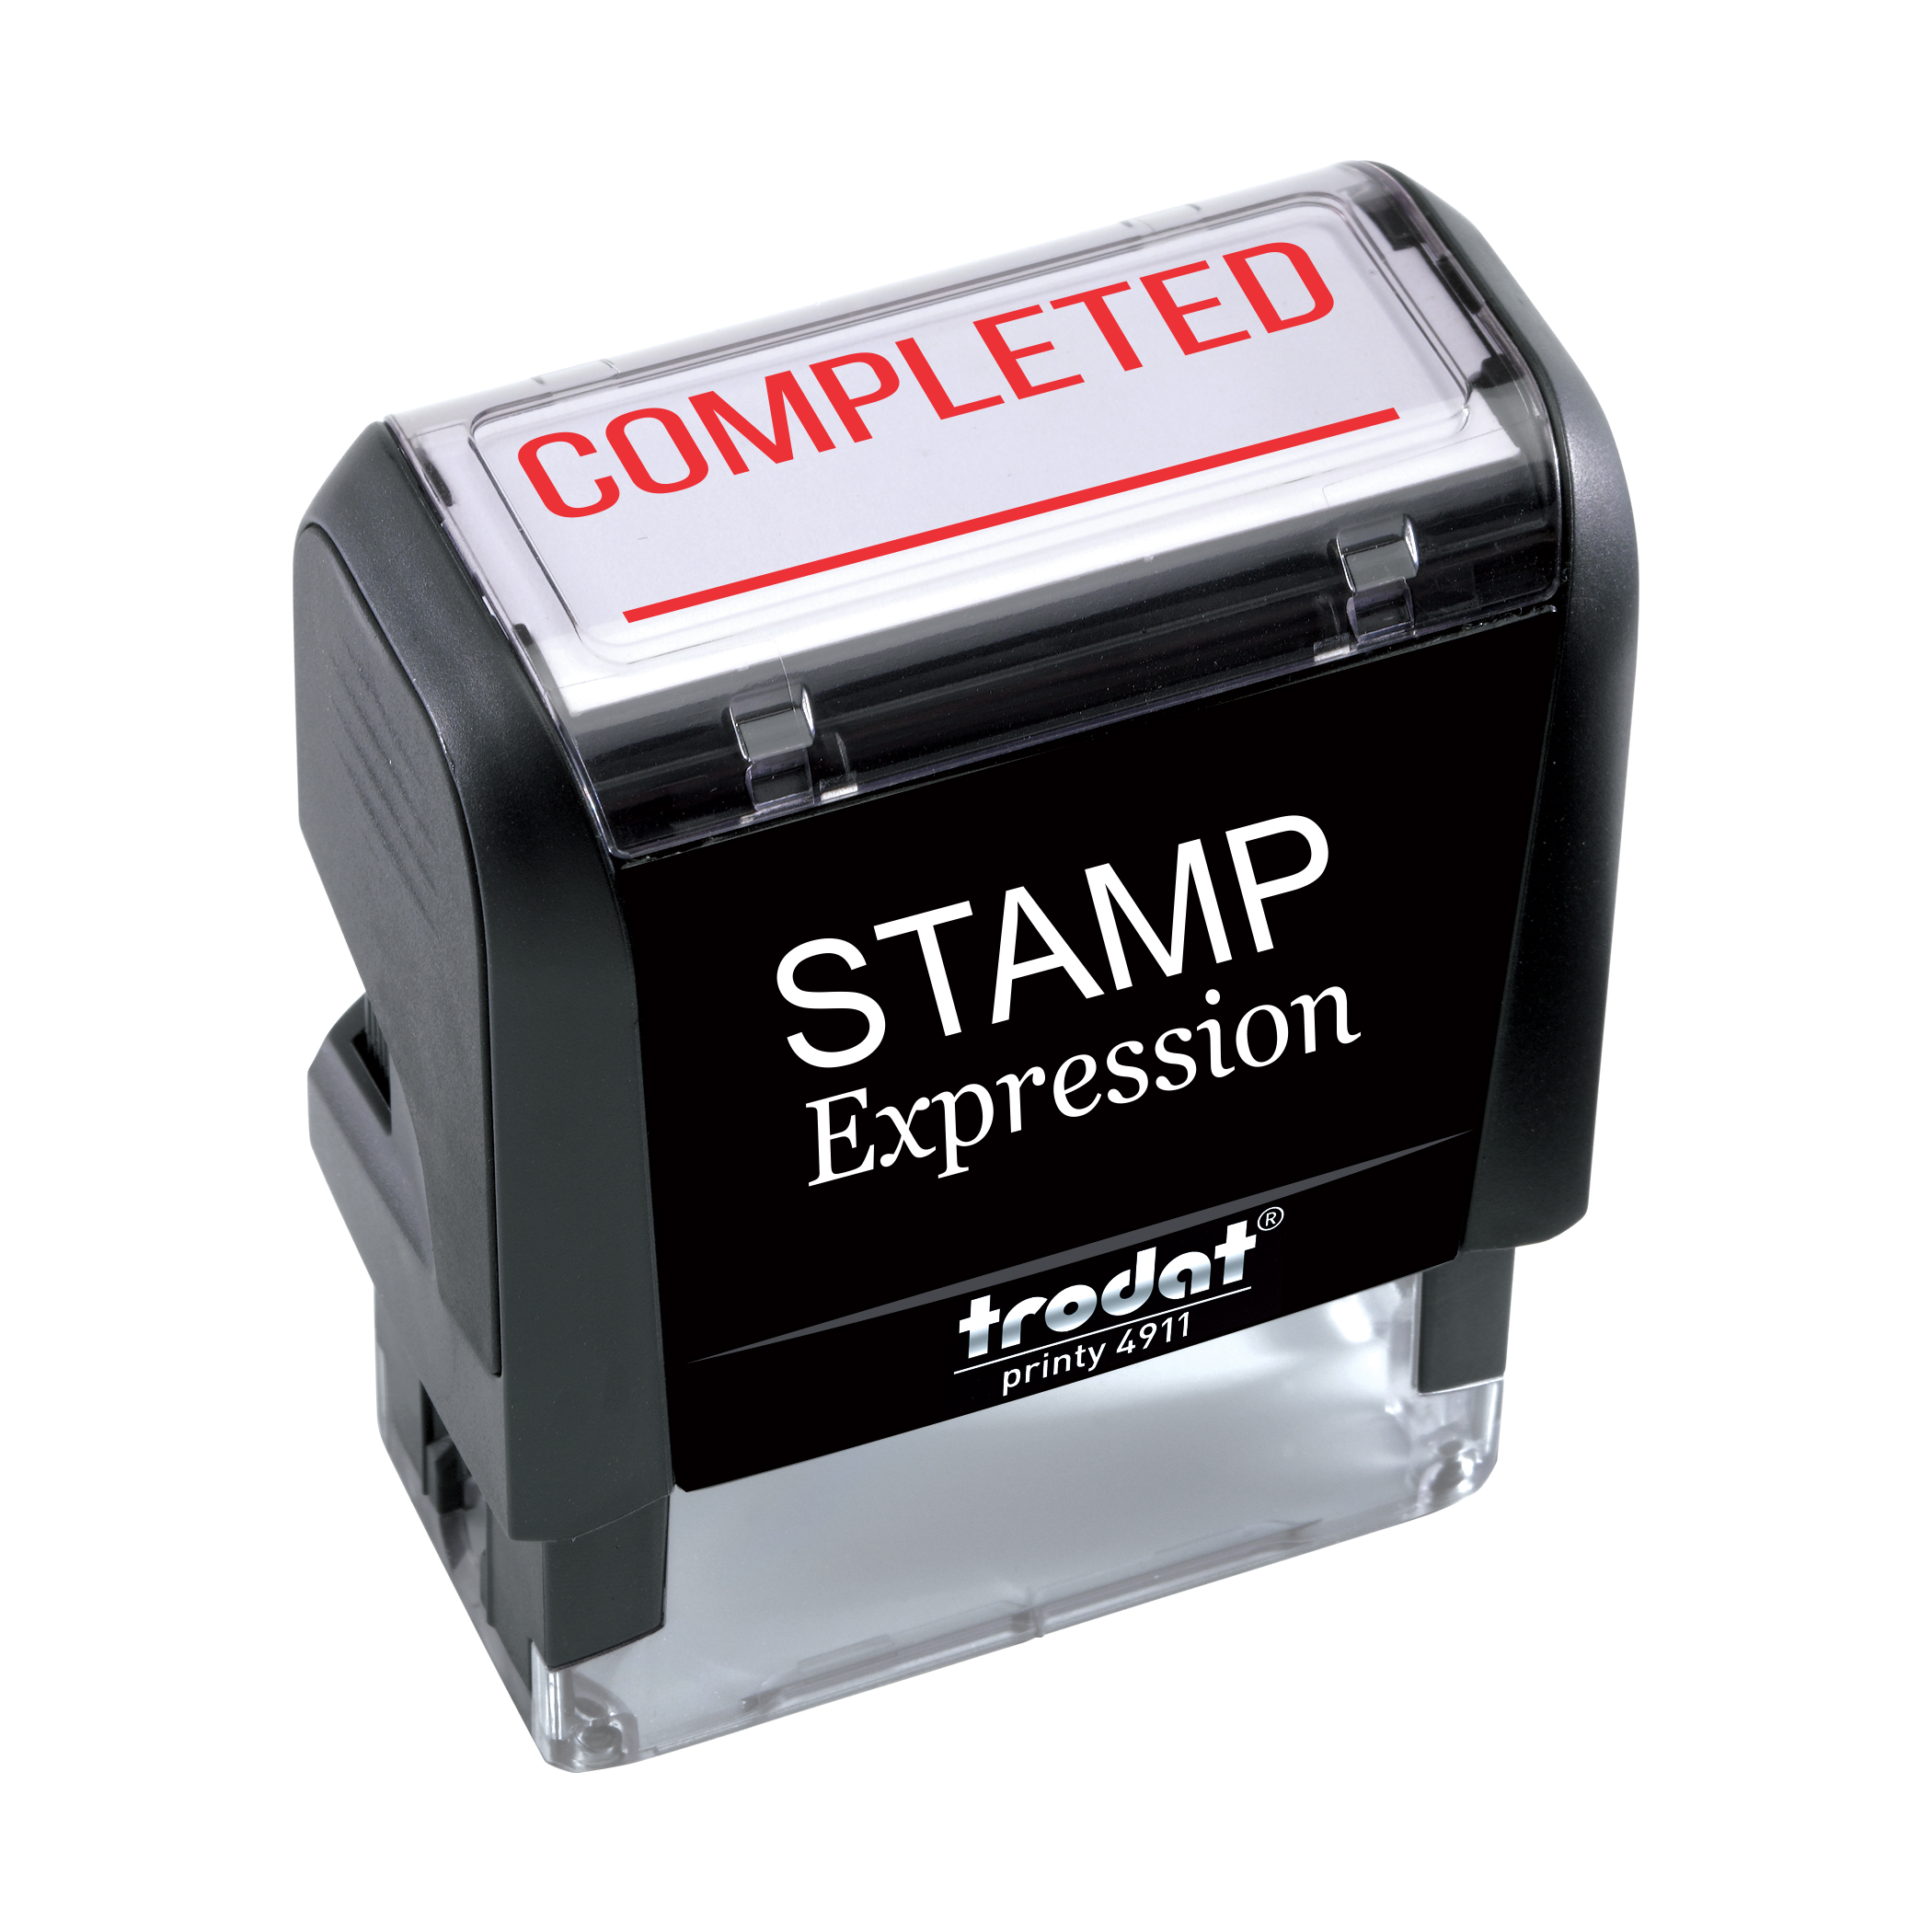 Completed with line Office Self Inking Rubber Stamp